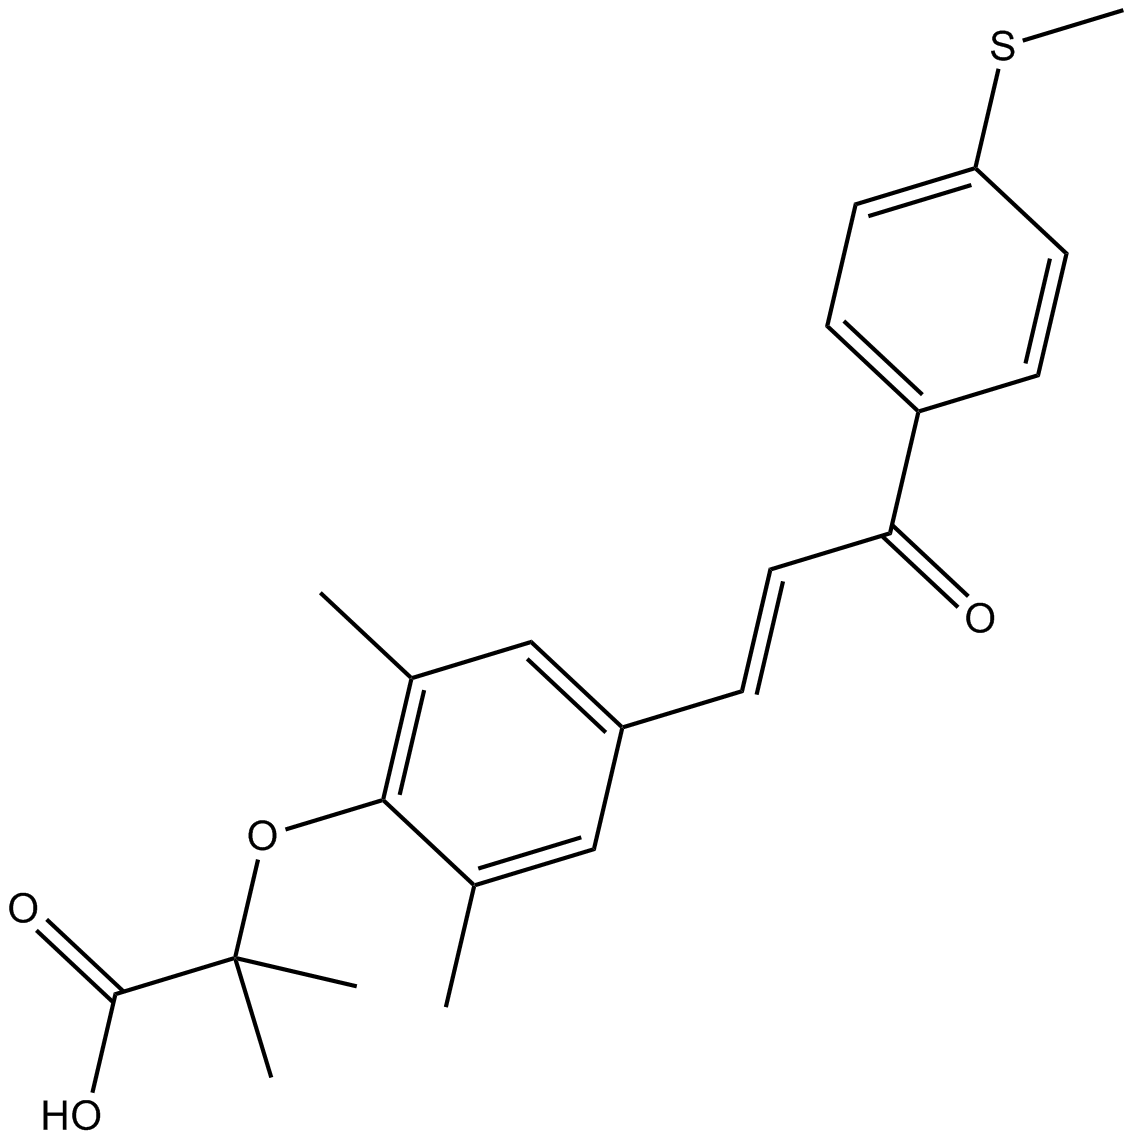 Elafibranor (GFT505) Chemical Structure